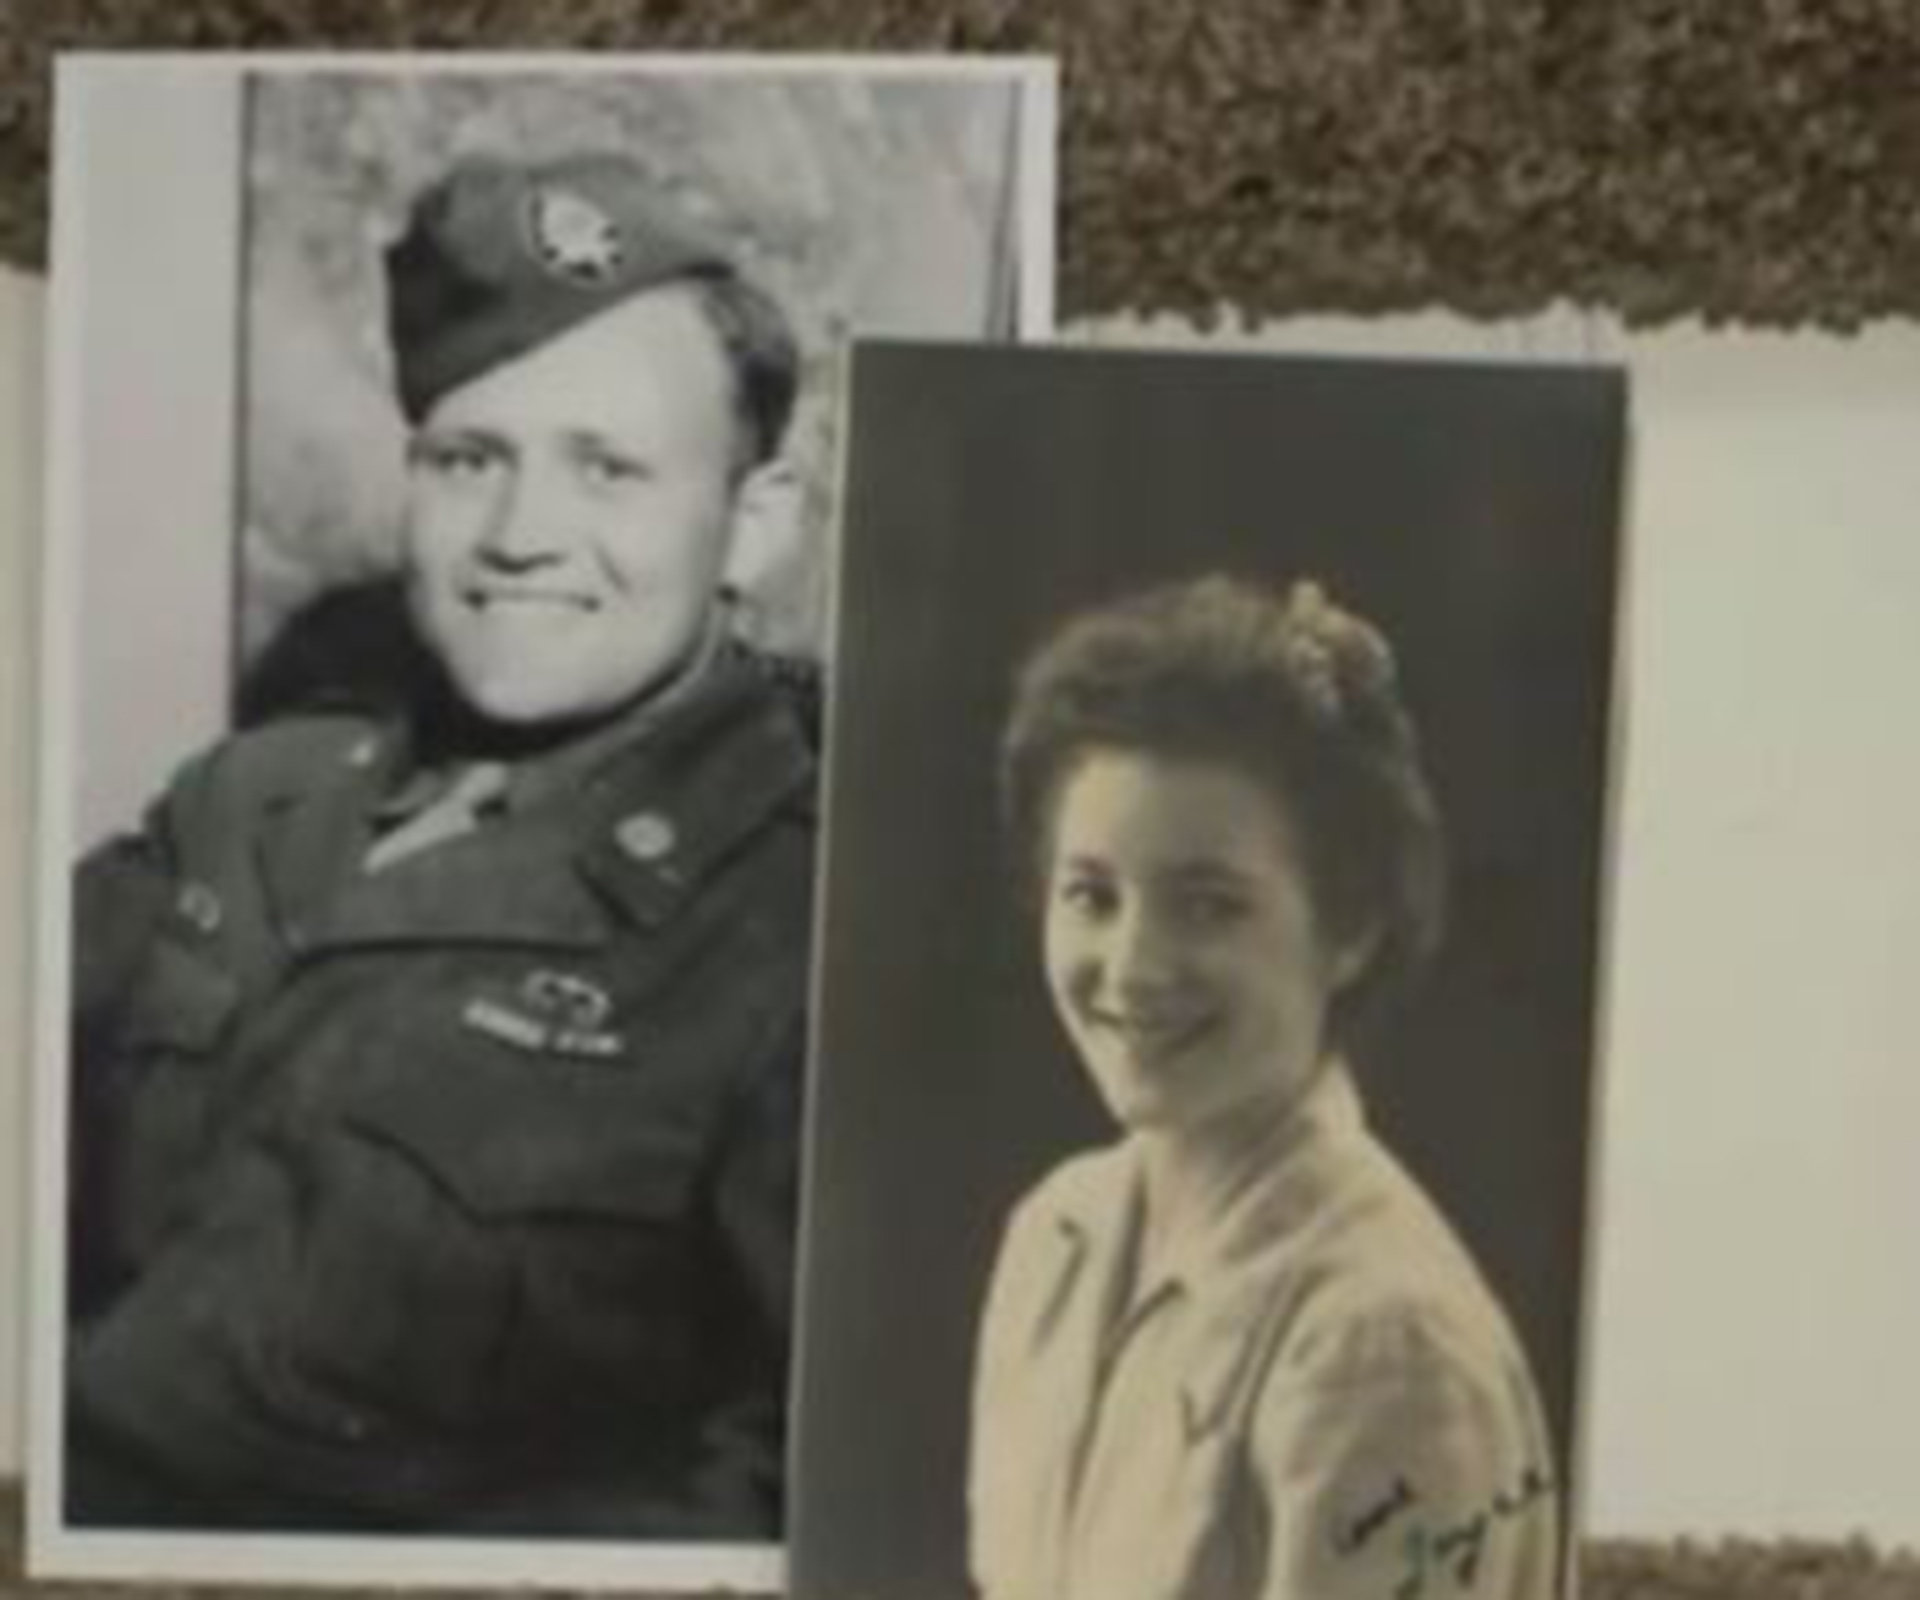 93-year-old soldier reunited with his first love after 70 years apart